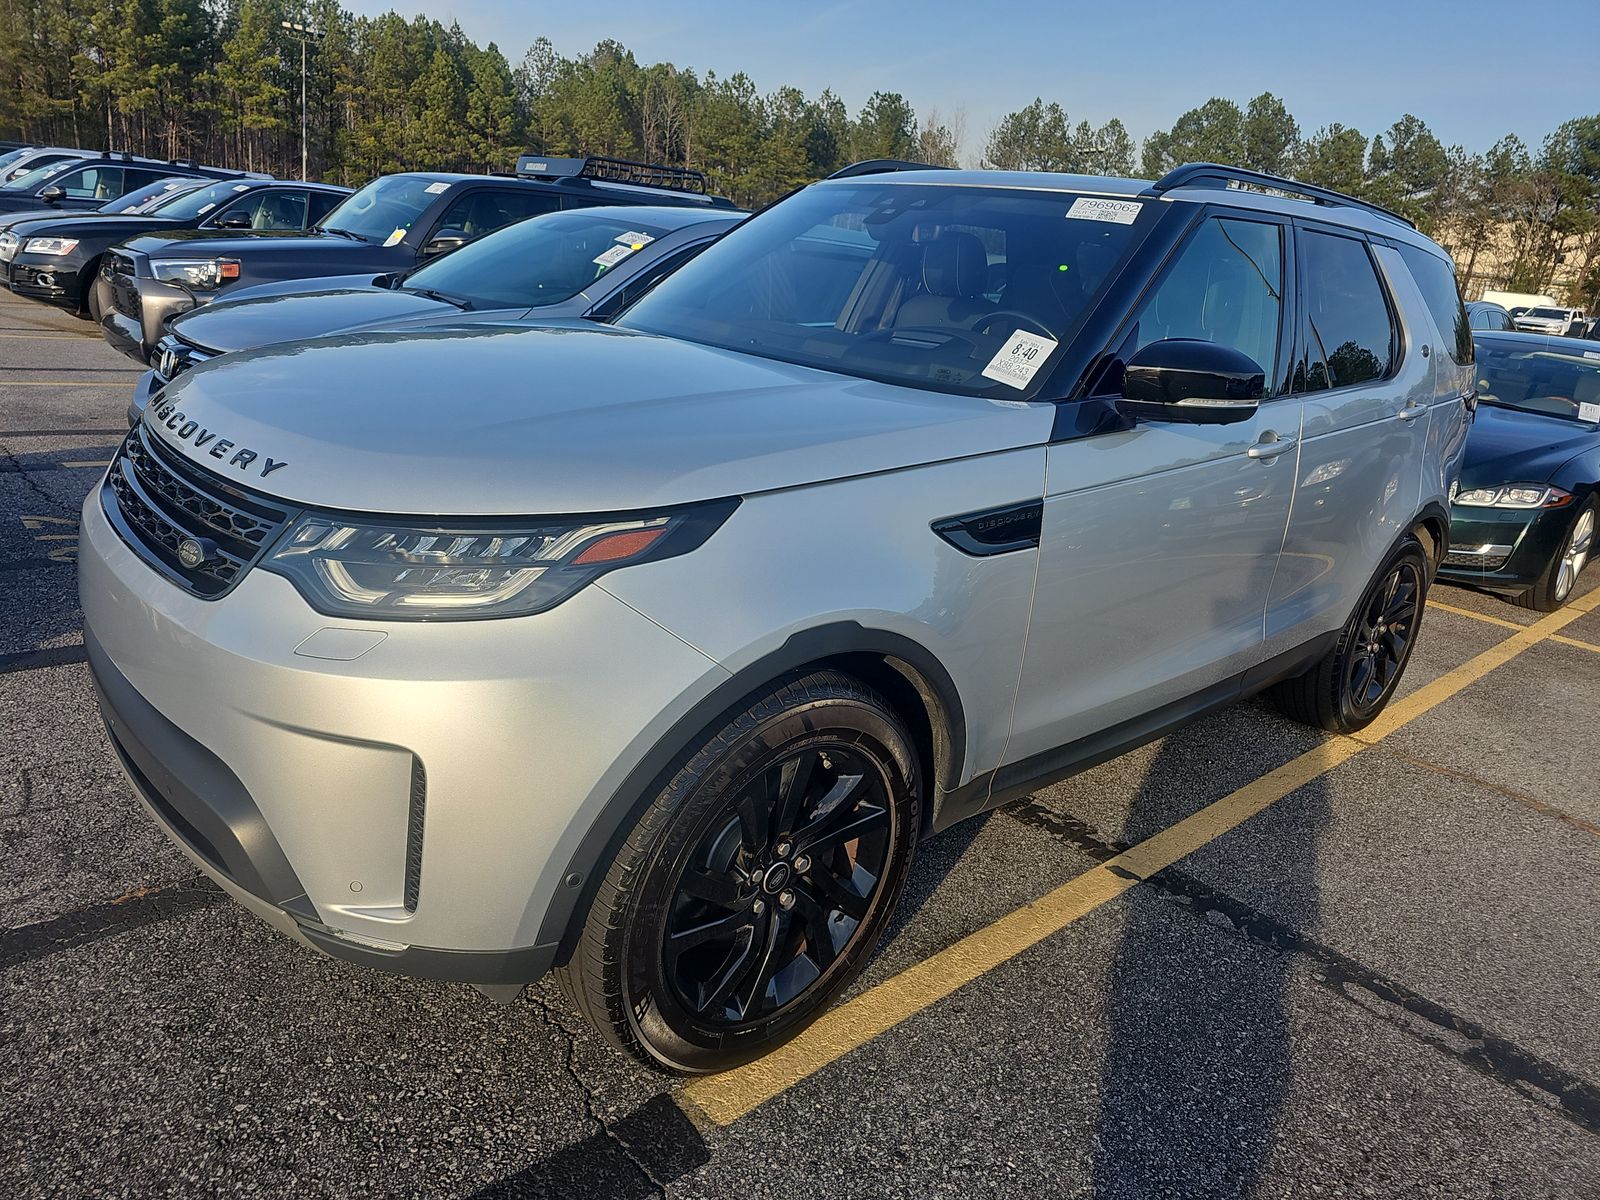 2017 Land Rover Discovery HSE AWD